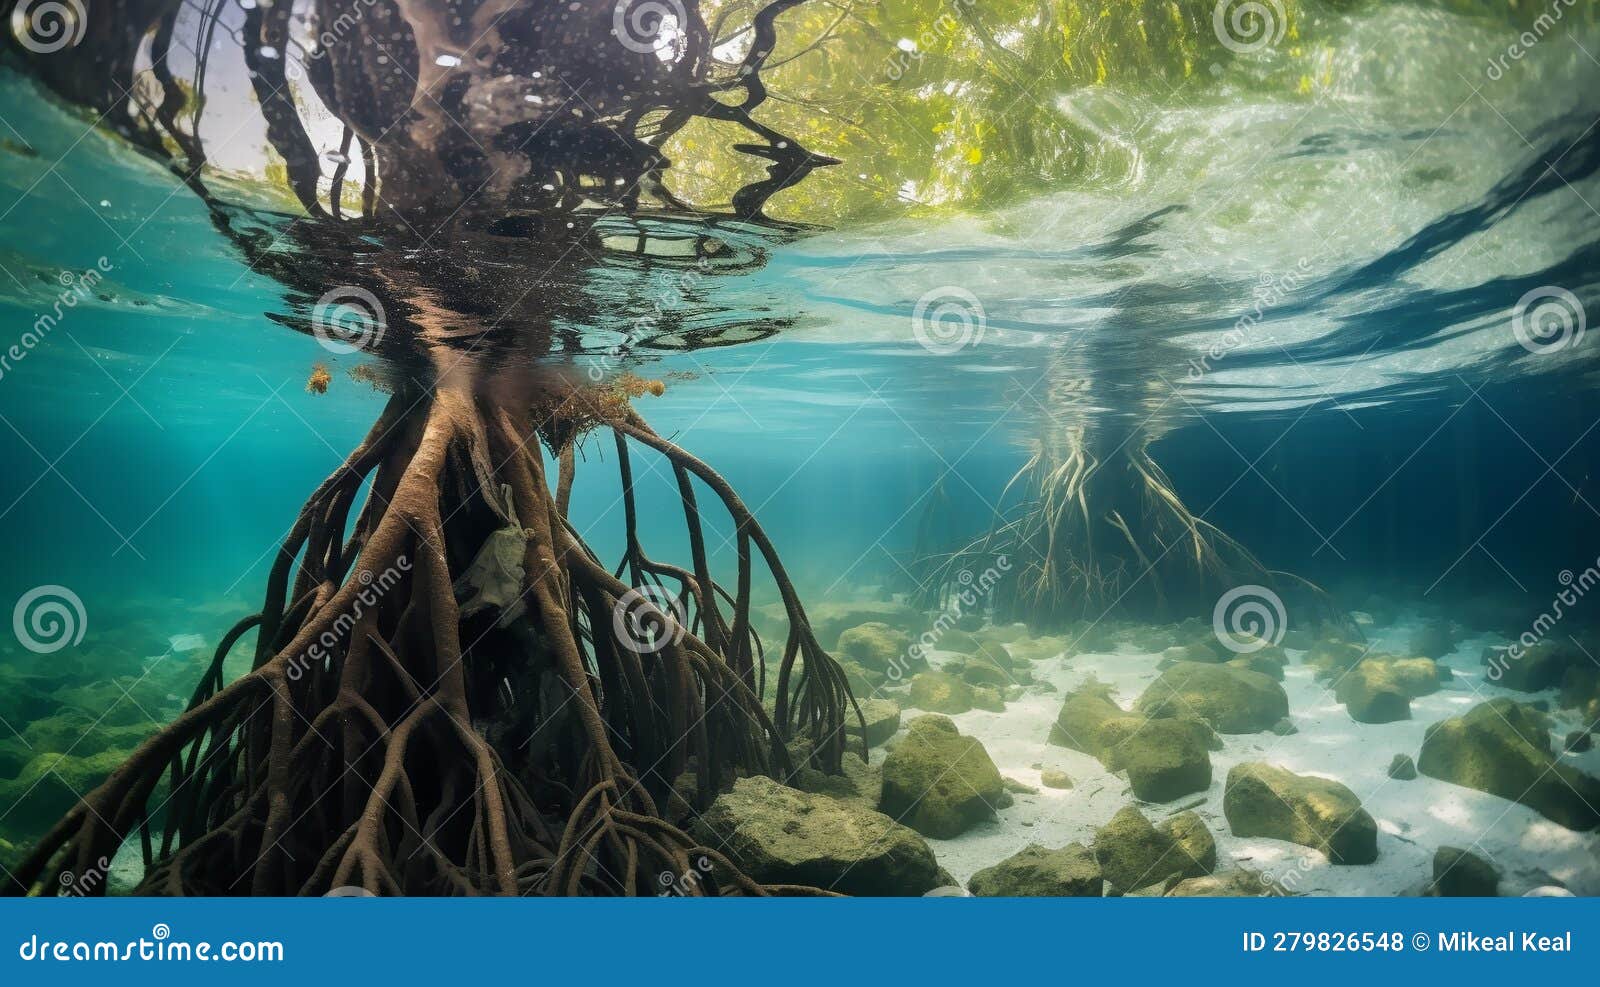 Underwater Photograph of a Tropical Mangrove Trees Roots, Above and ...